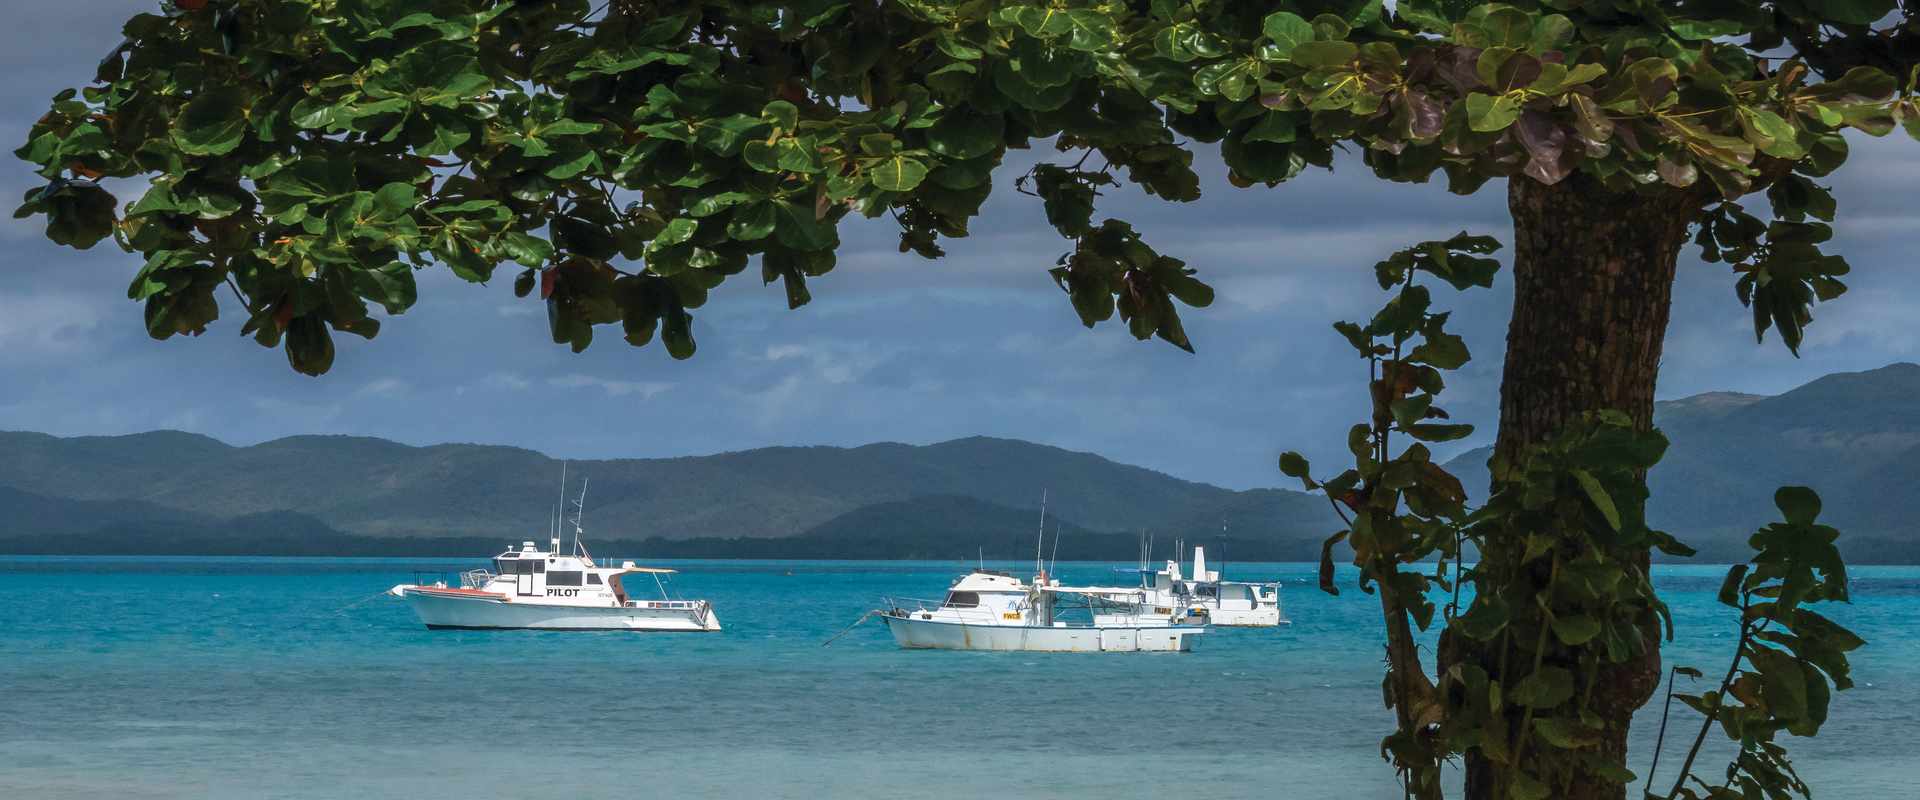 View of boats on the water through a tree on Thursday Island in North Queensland.